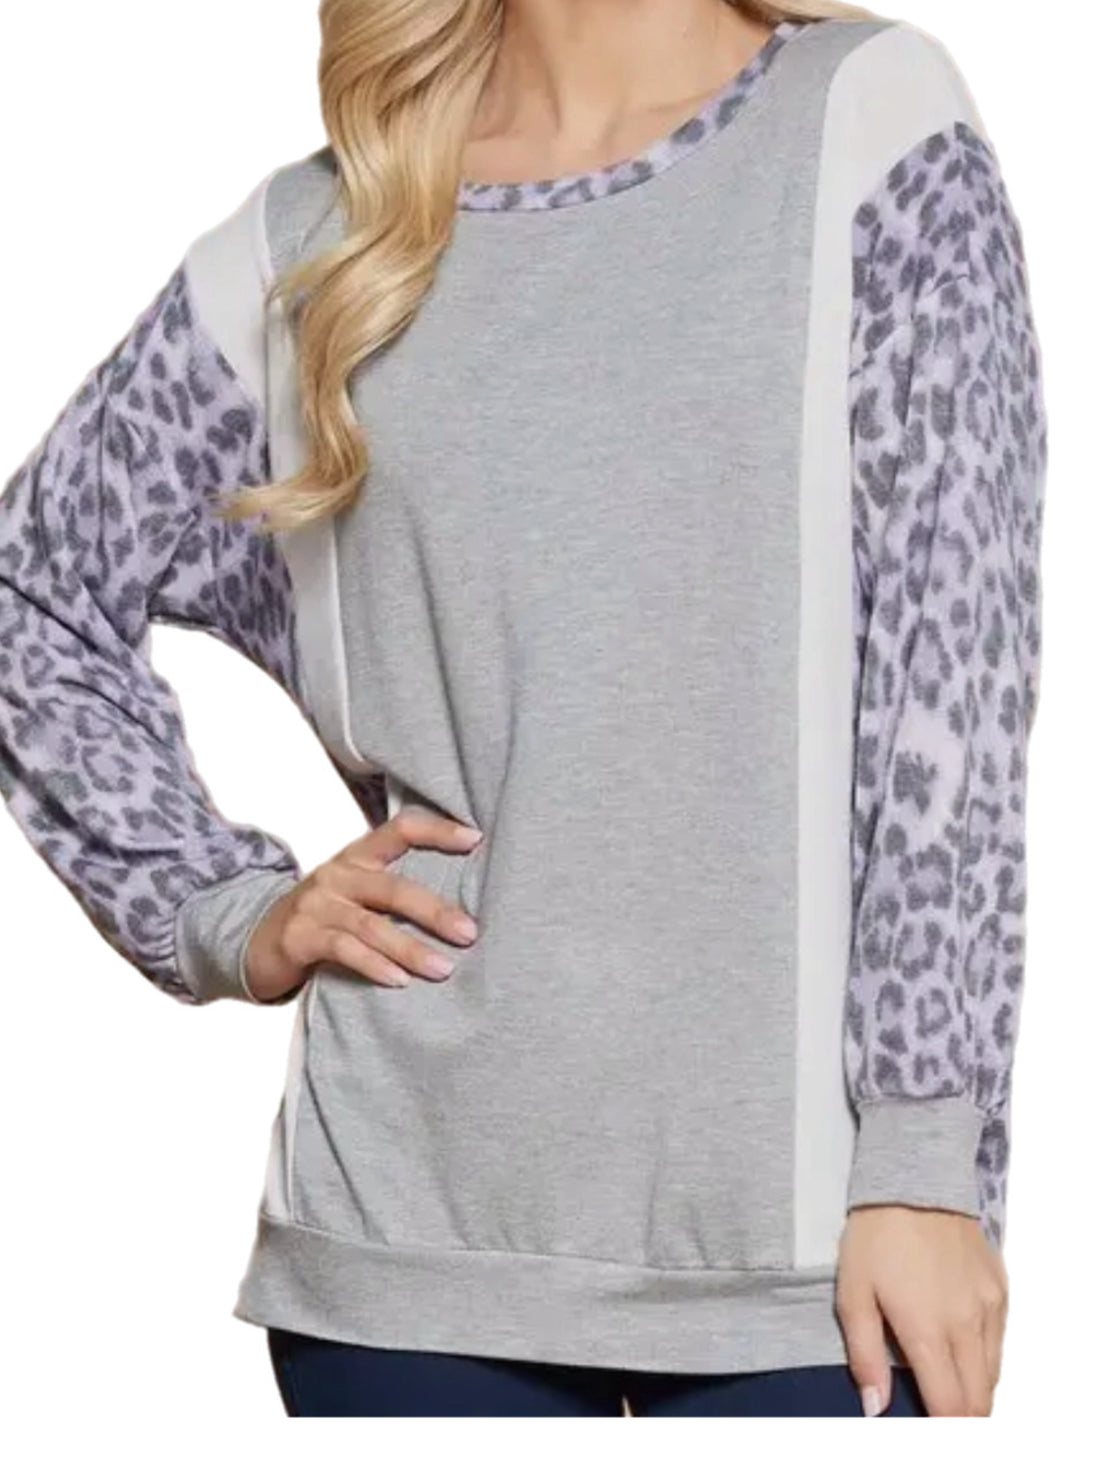 Gray and Lavender Leopard Top